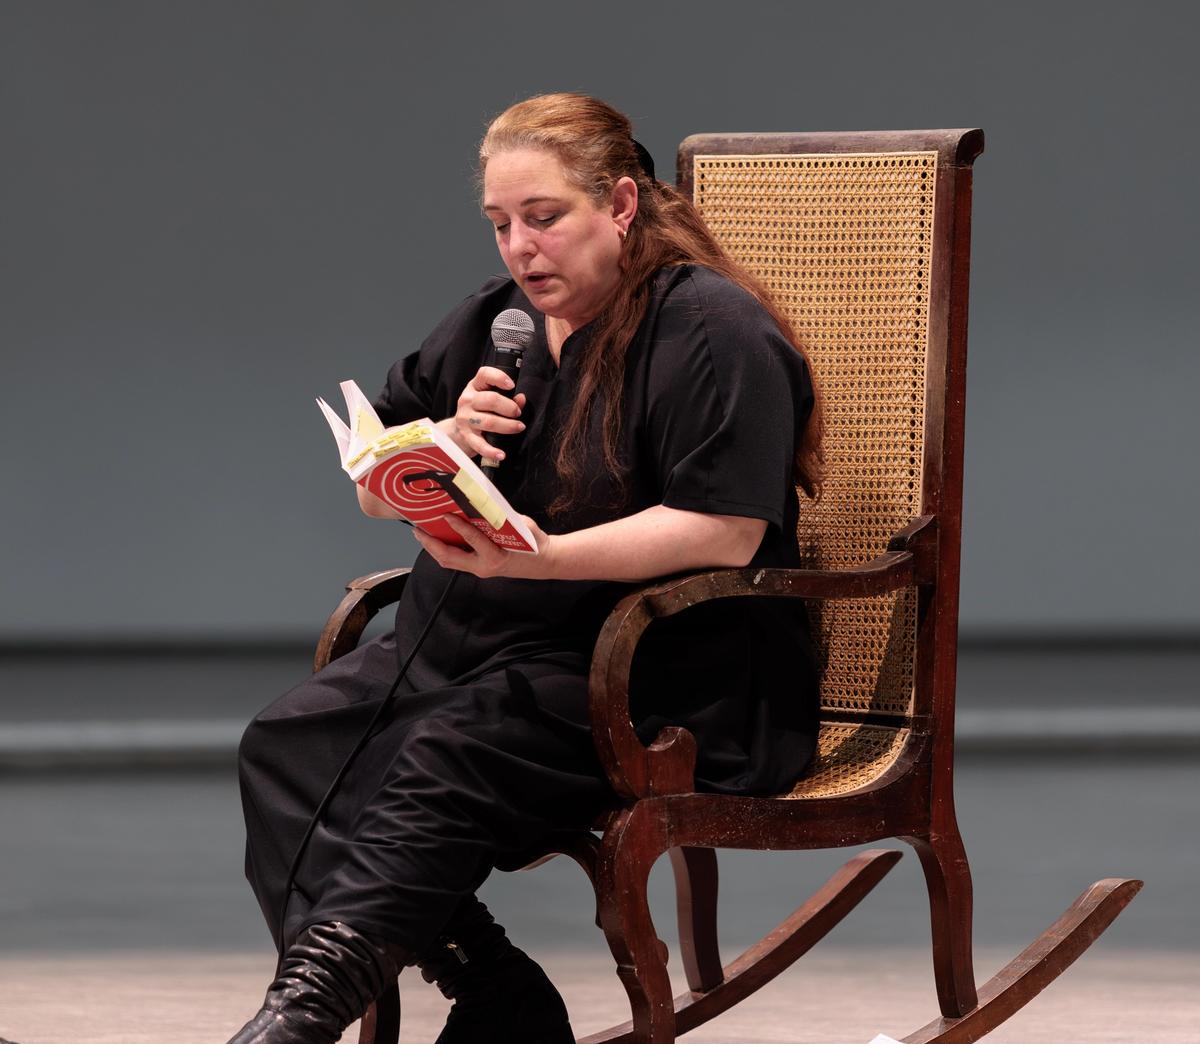 Tania Bruguera, Where Your Ideas Become Civic Actions (100 Hours Reading “The Origins of Totalitarianism”), Hamburger Bahnhof – Nationalgalerie der Gegenwart, 7-11 February. 

© Estudio Bruguera / Nationalgalerie – Staatliche Museen zu Berlin / Jacopo La Forgia
